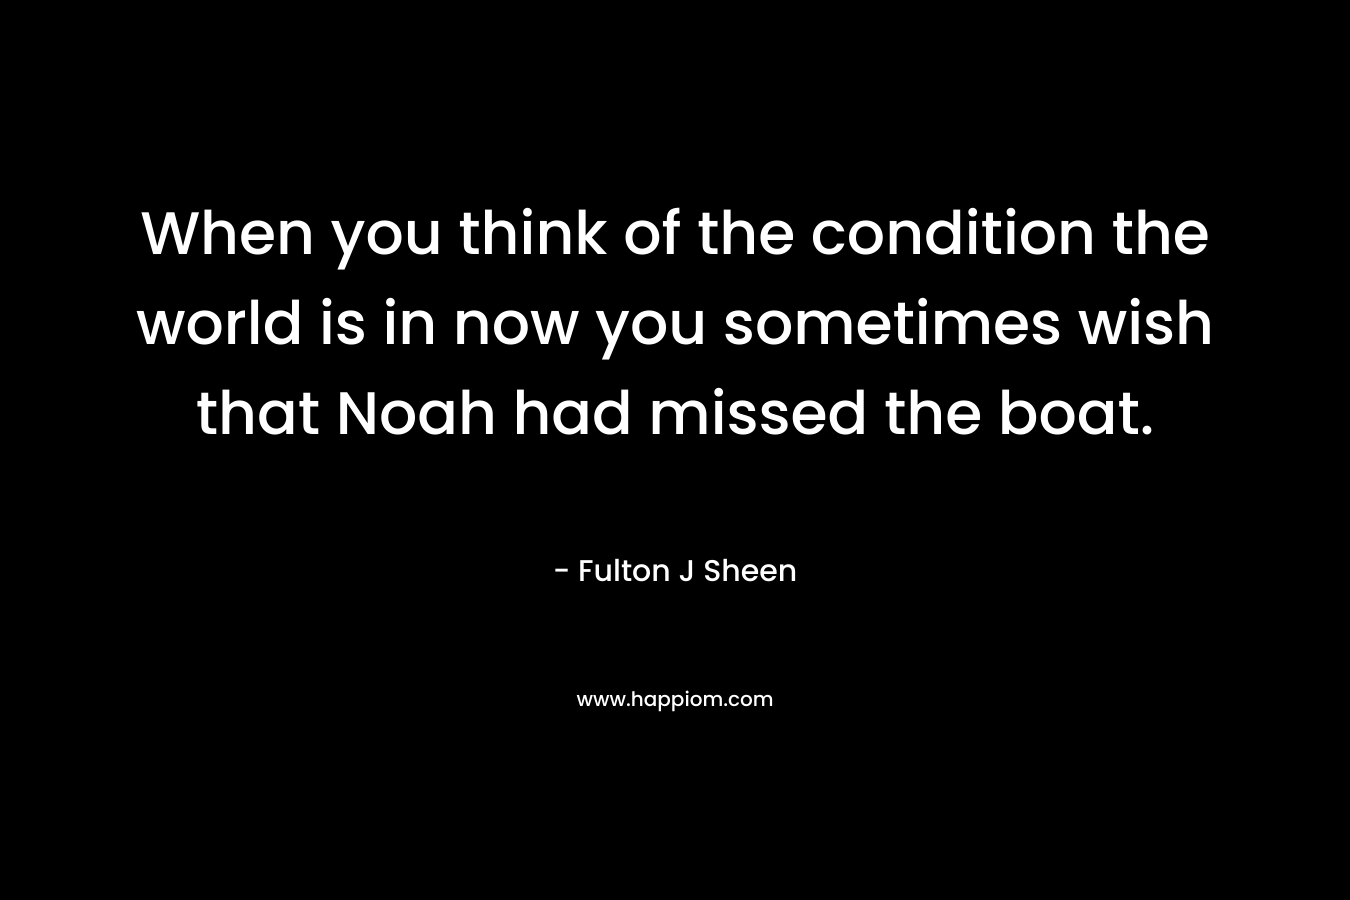 When you think of the condition the world is in now you sometimes wish that Noah had missed the boat. – Fulton J Sheen